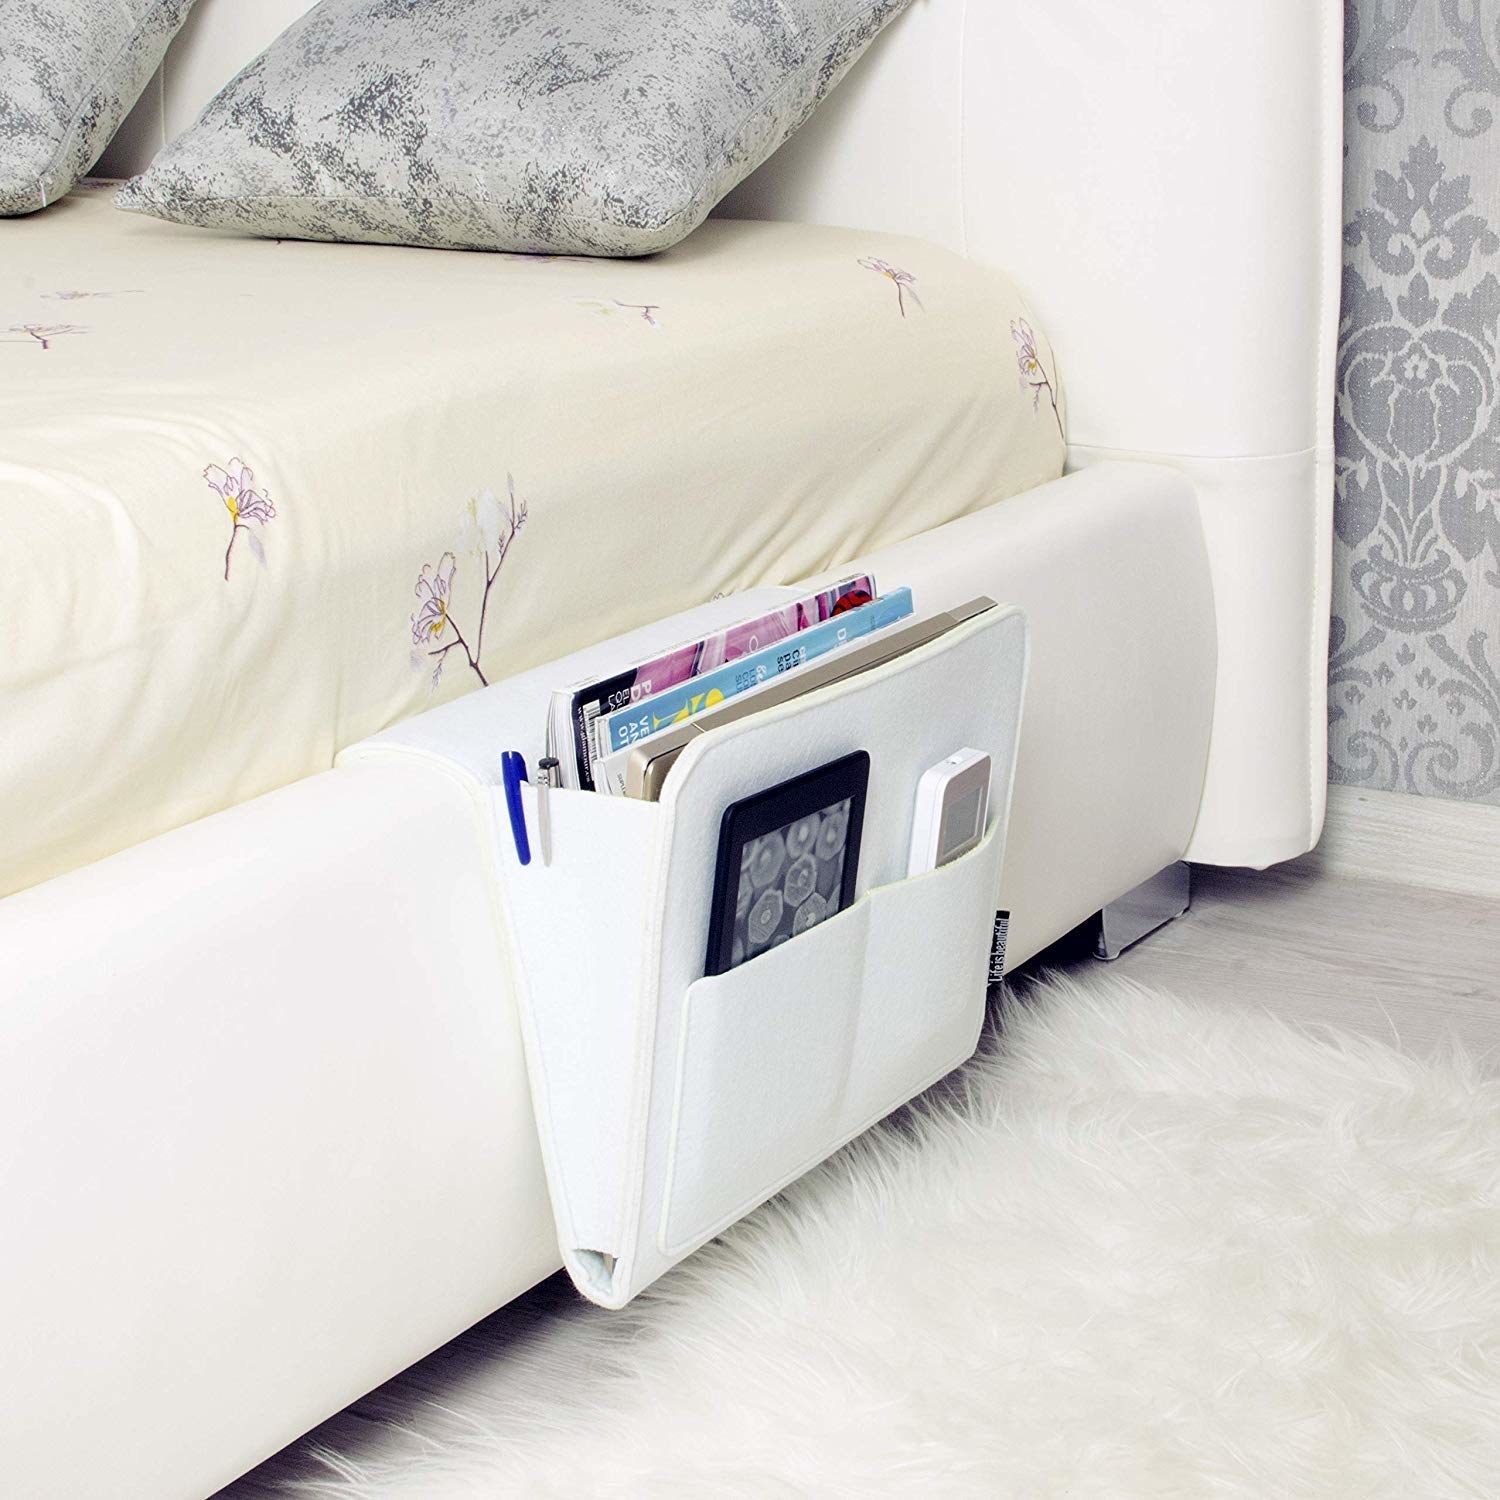 A bedside caddy attached to a bed with magazines, stationery and other items placed in it